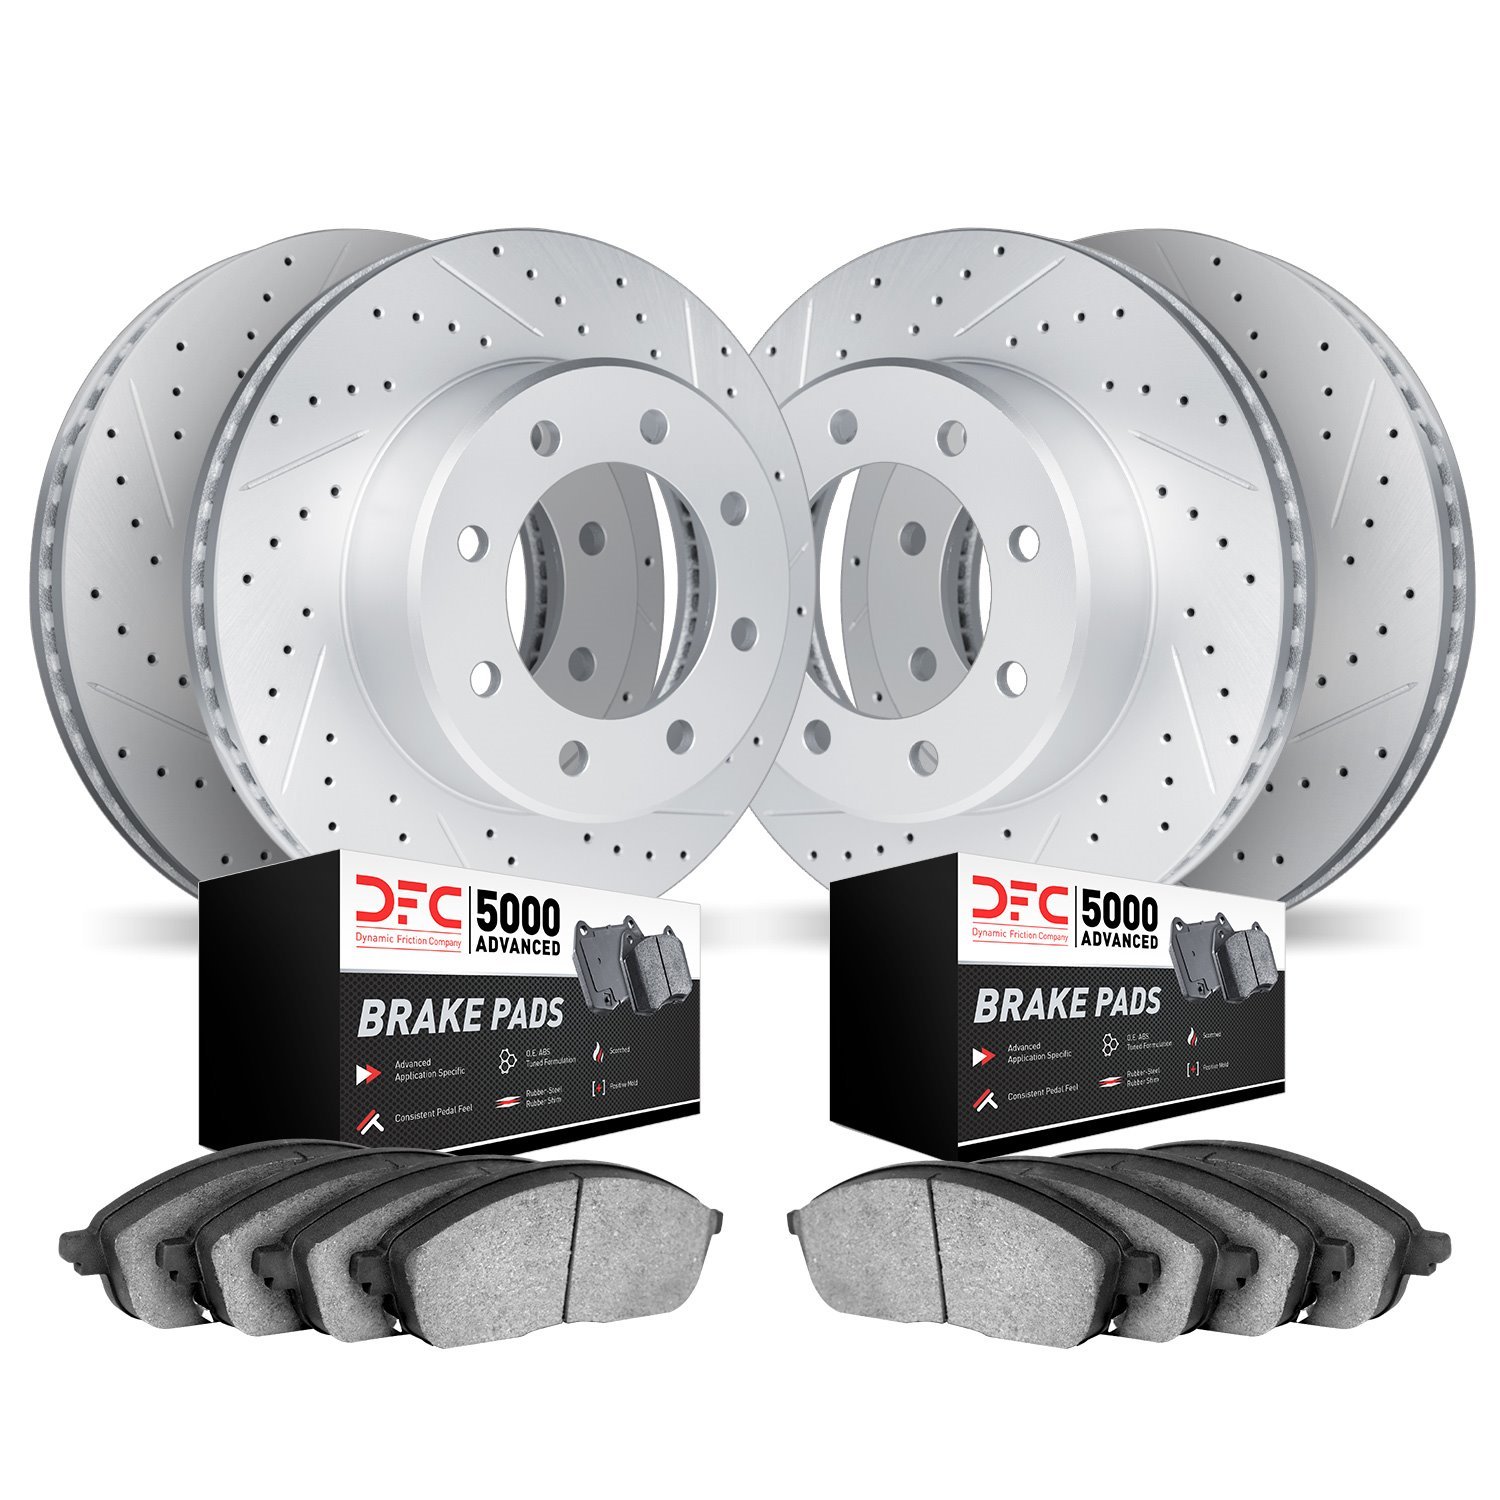 2504-54241 Geoperformance Drilled/Slotted Rotors w/5000 Advanced Brake Pads Kit, 1999-1999 Ford/Lincoln/Mercury/Mazda, Position: